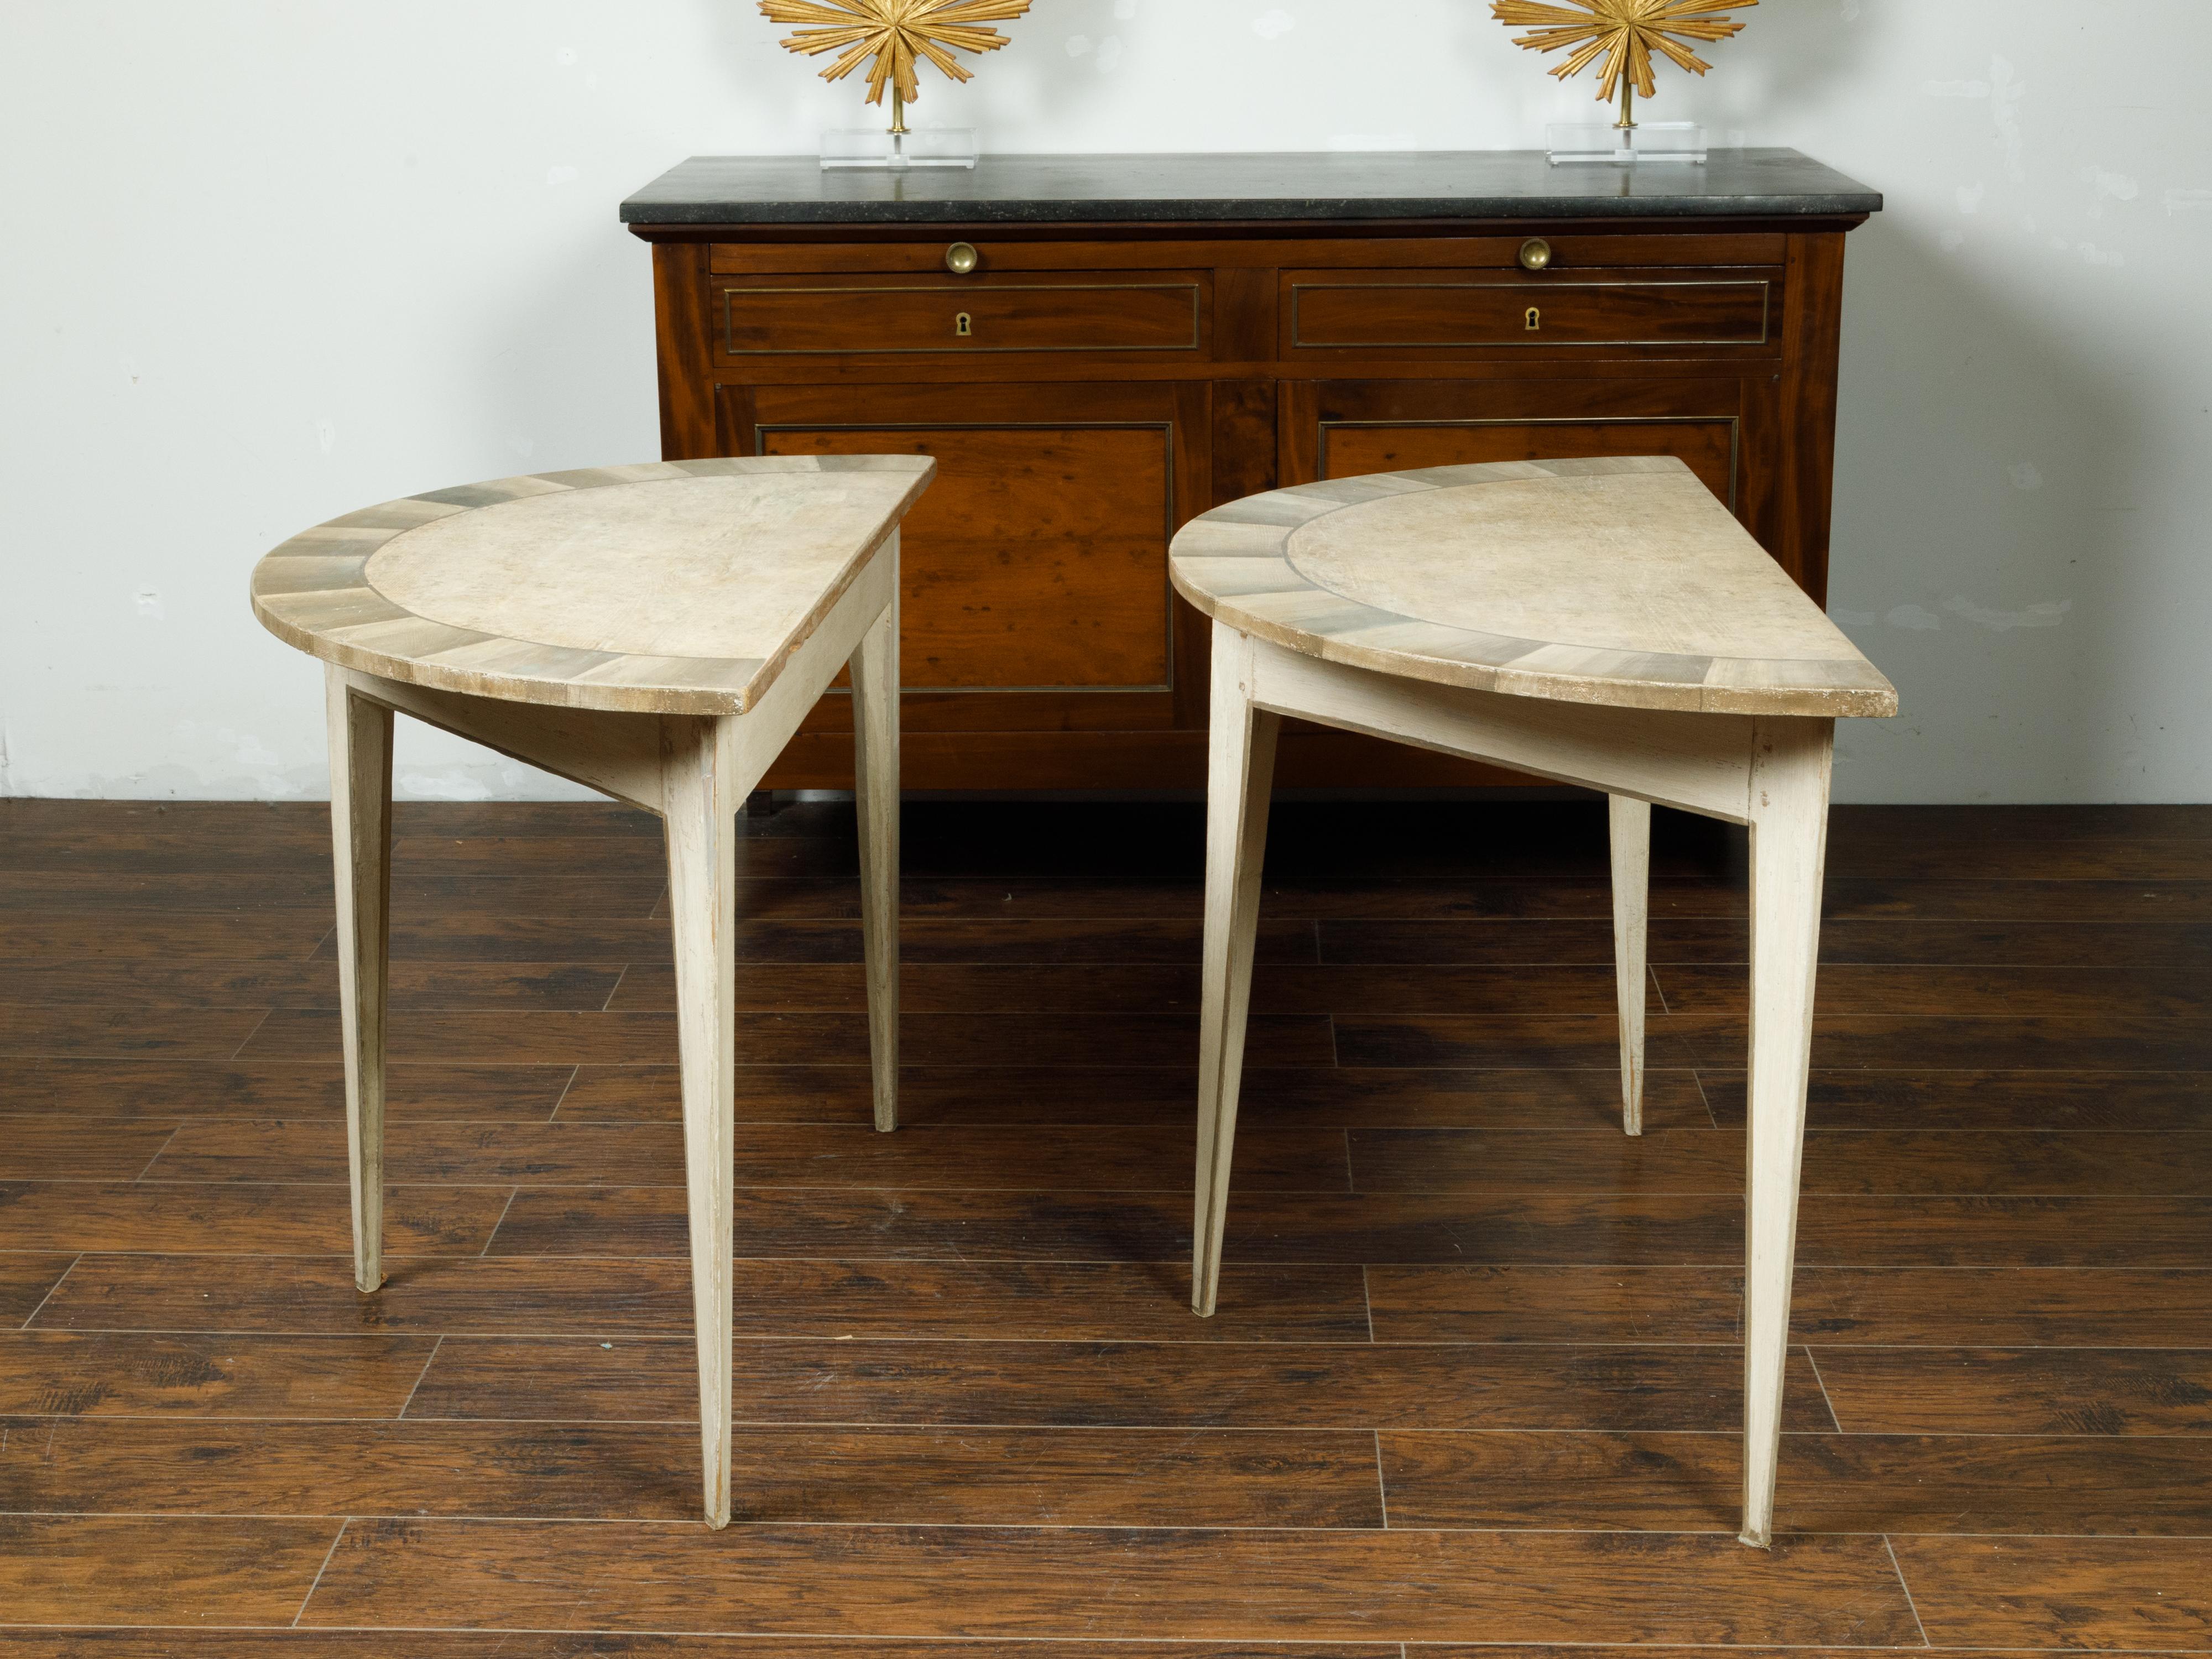 Pair of Swedish 1930-1940 Painted Wood Demilune Tables with Radiating Motifs 4